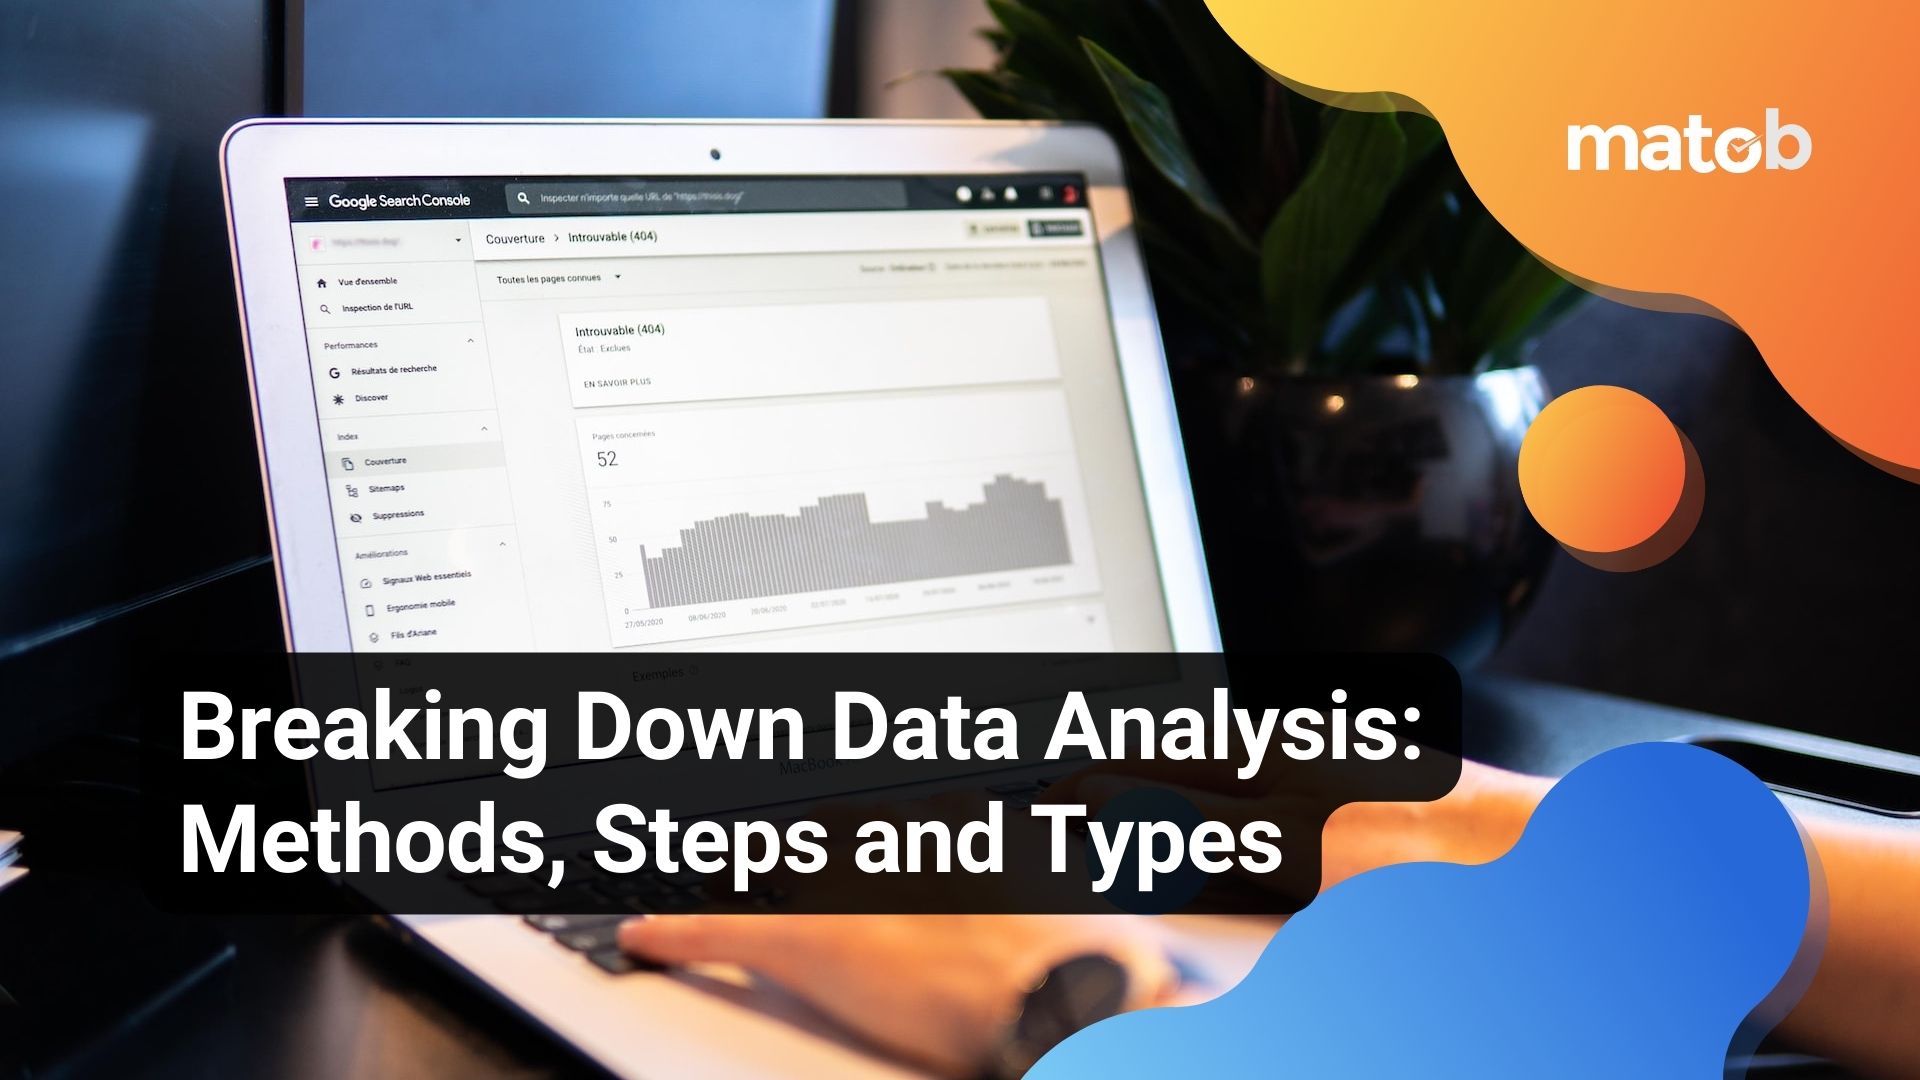 Breaking Down Data Analysis: Methods, Steps and Types